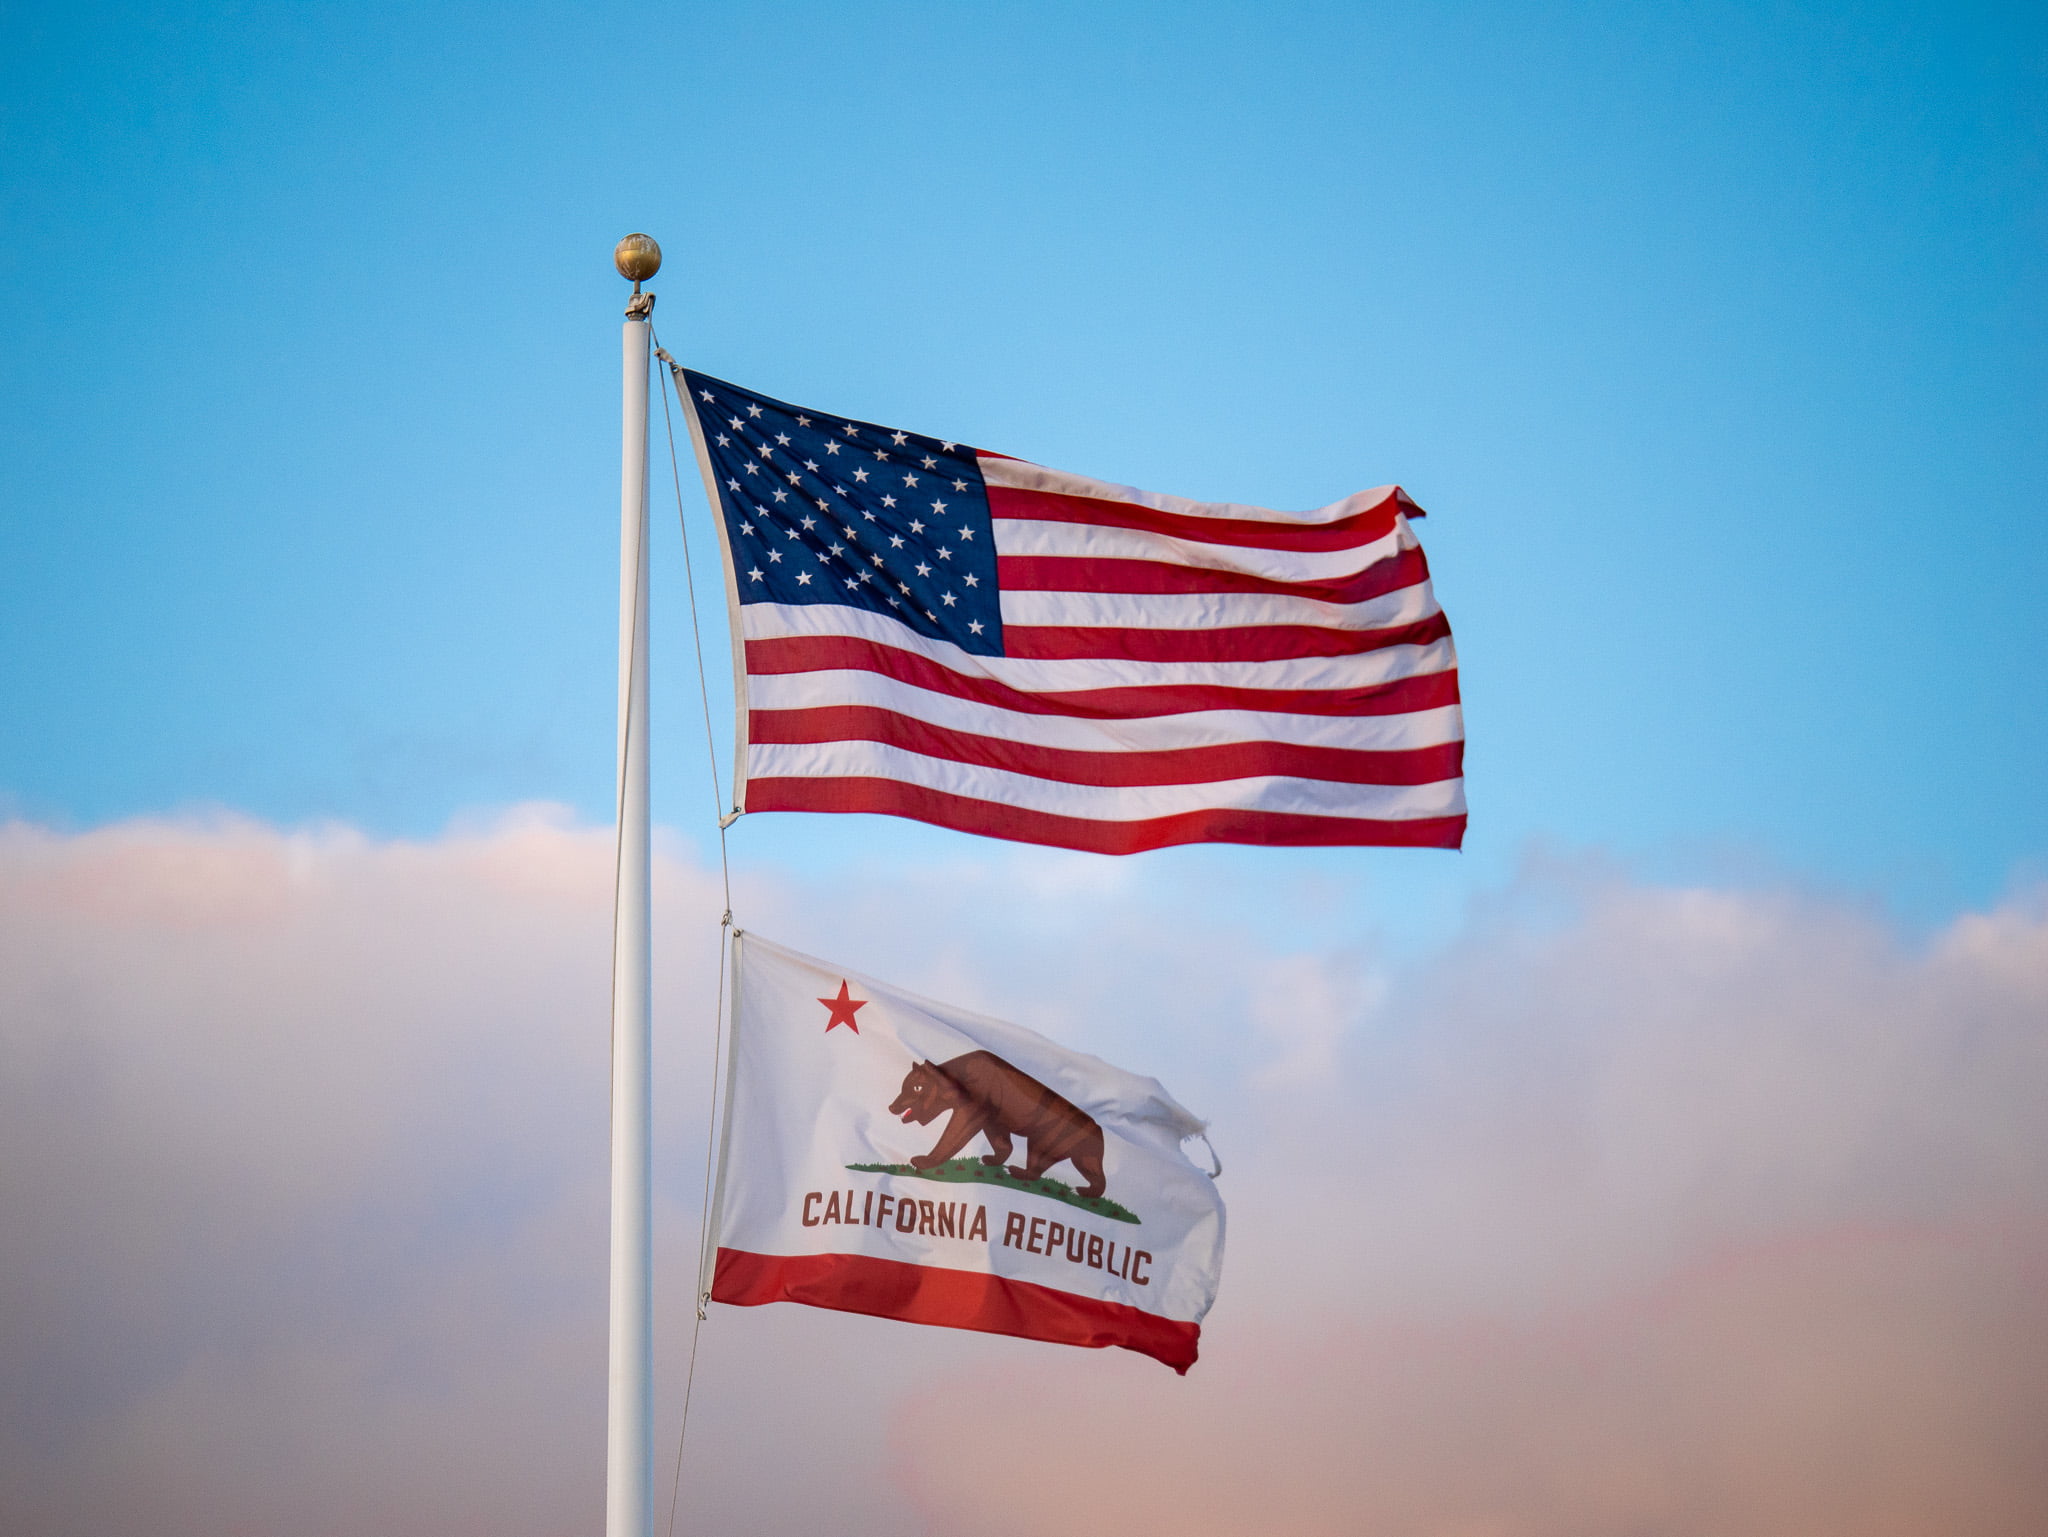 Roto Flight drone technology and Roto Flight aerial videography California symbolized by American and California flags, Roto Flight 3D mapping services.